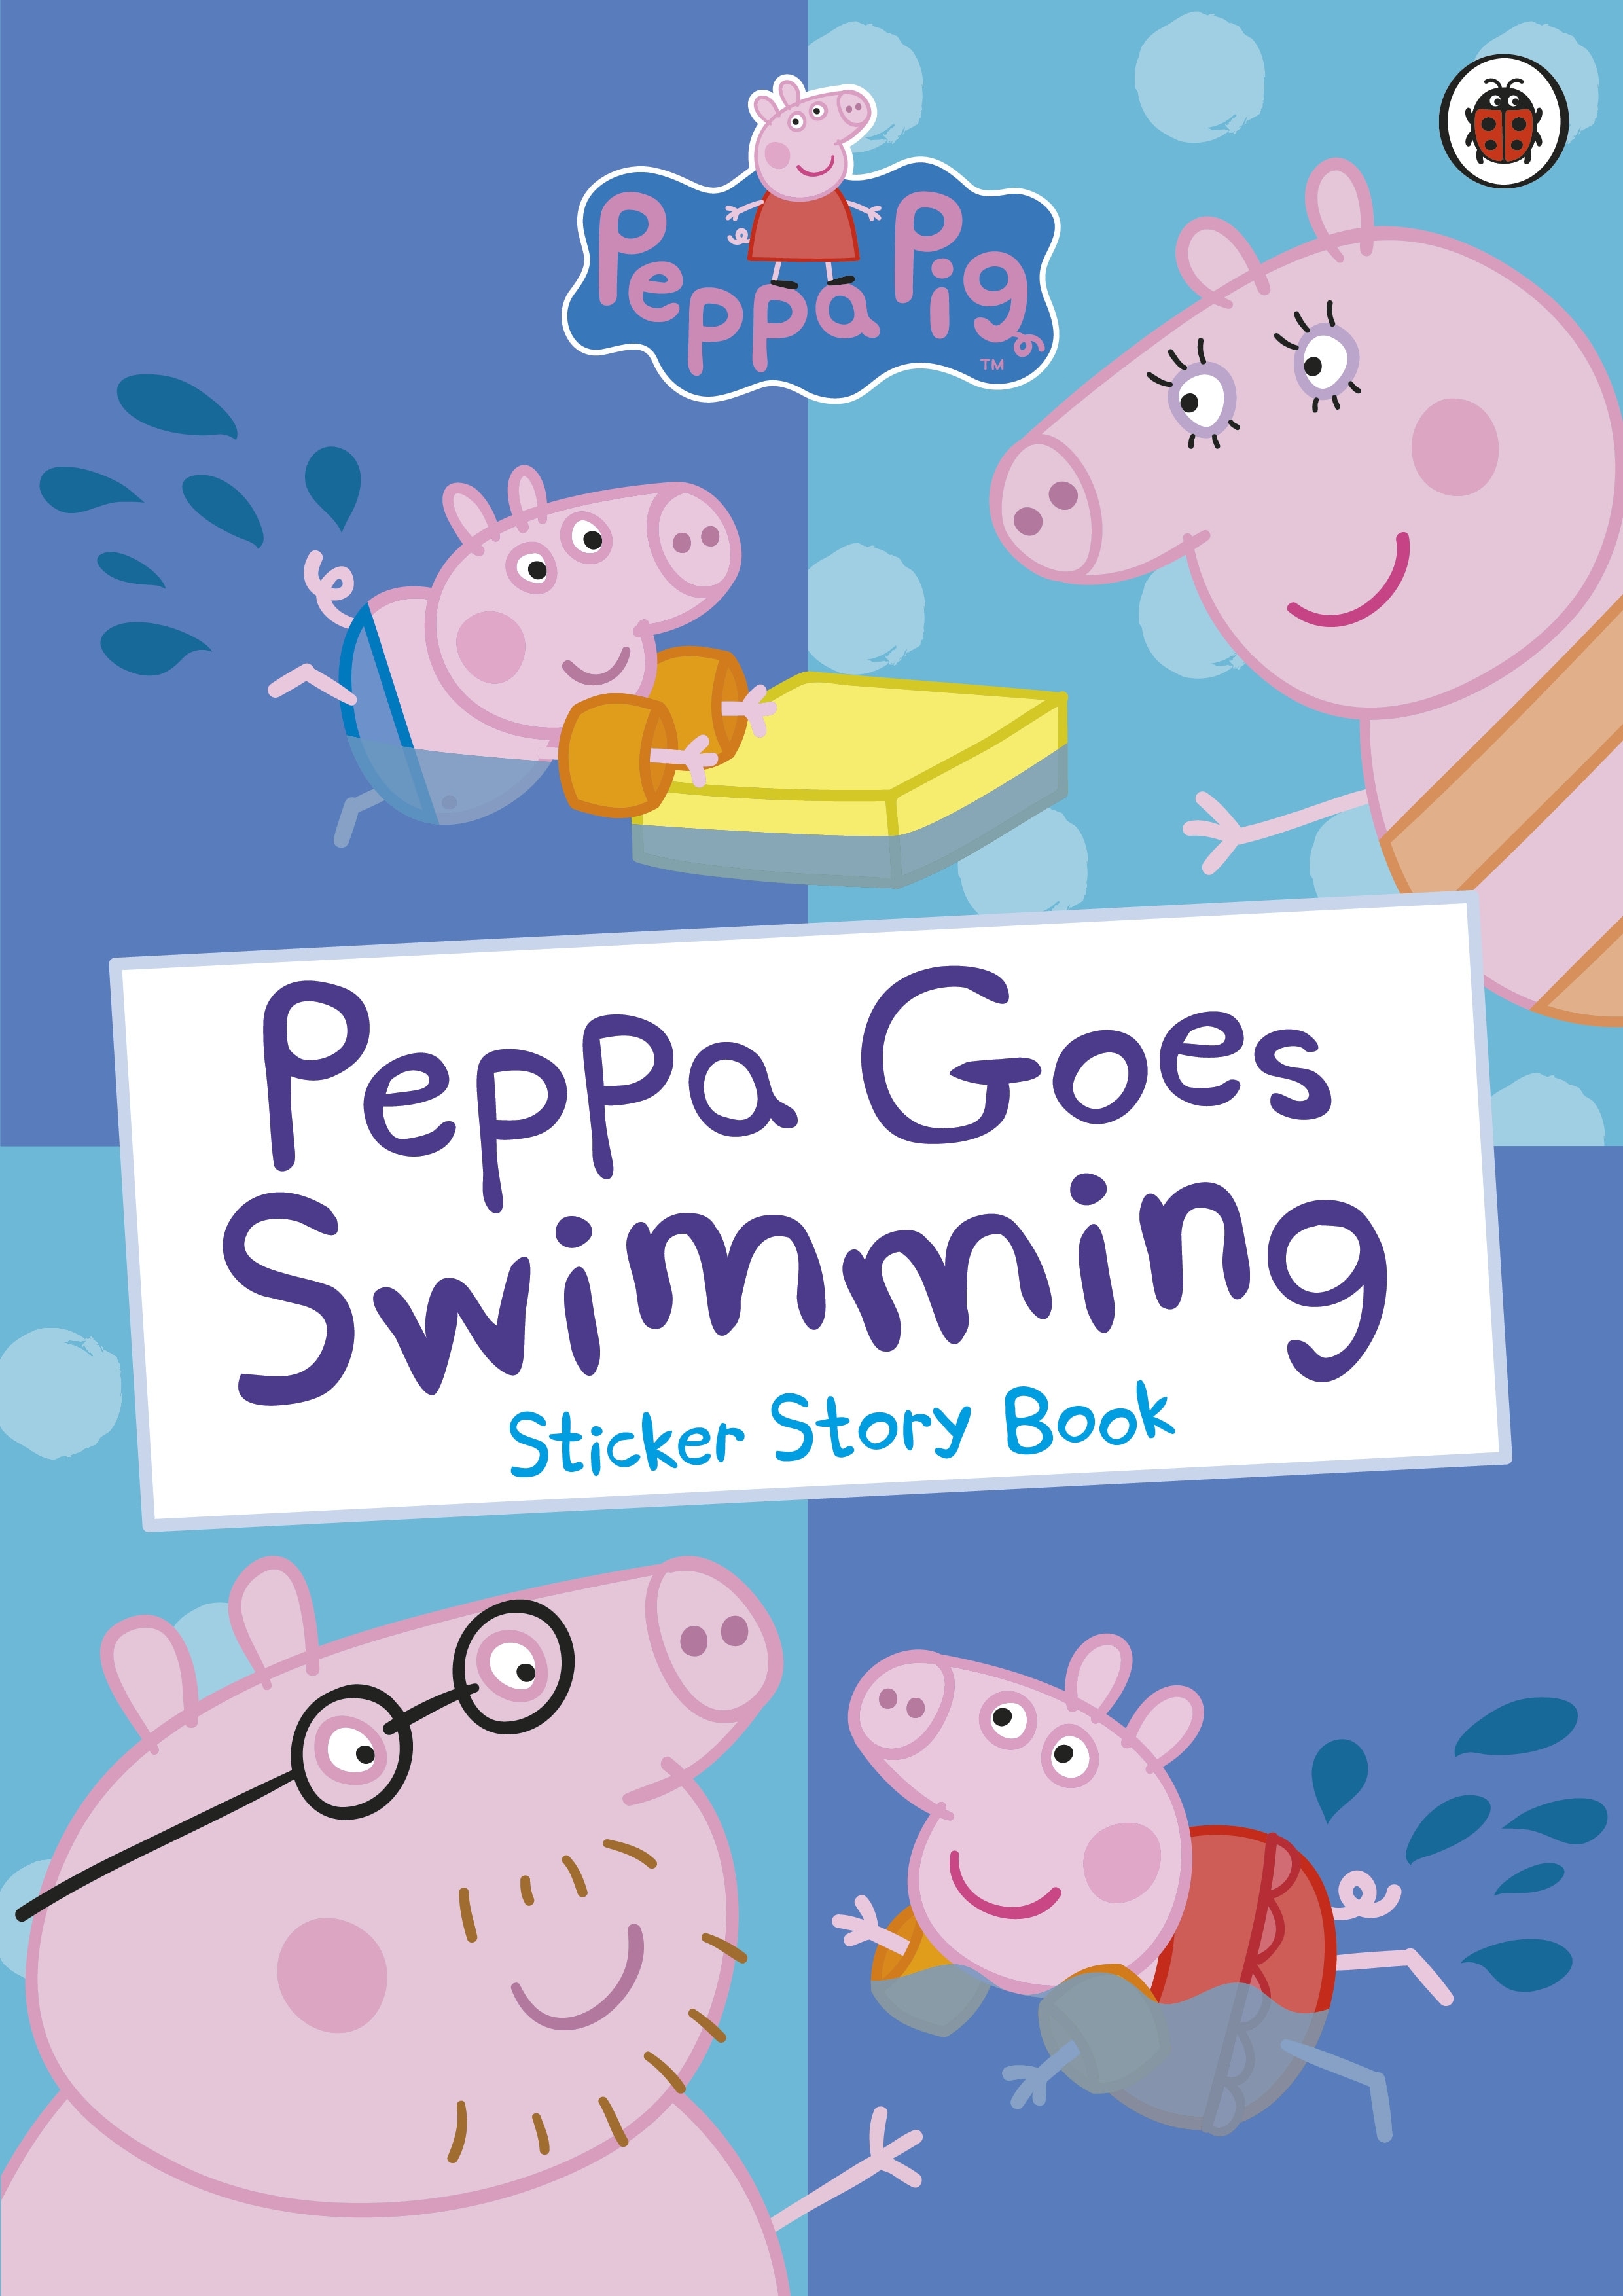 Book “Peppa Goes Swimming” by Peppa Pig — April 20, 2017